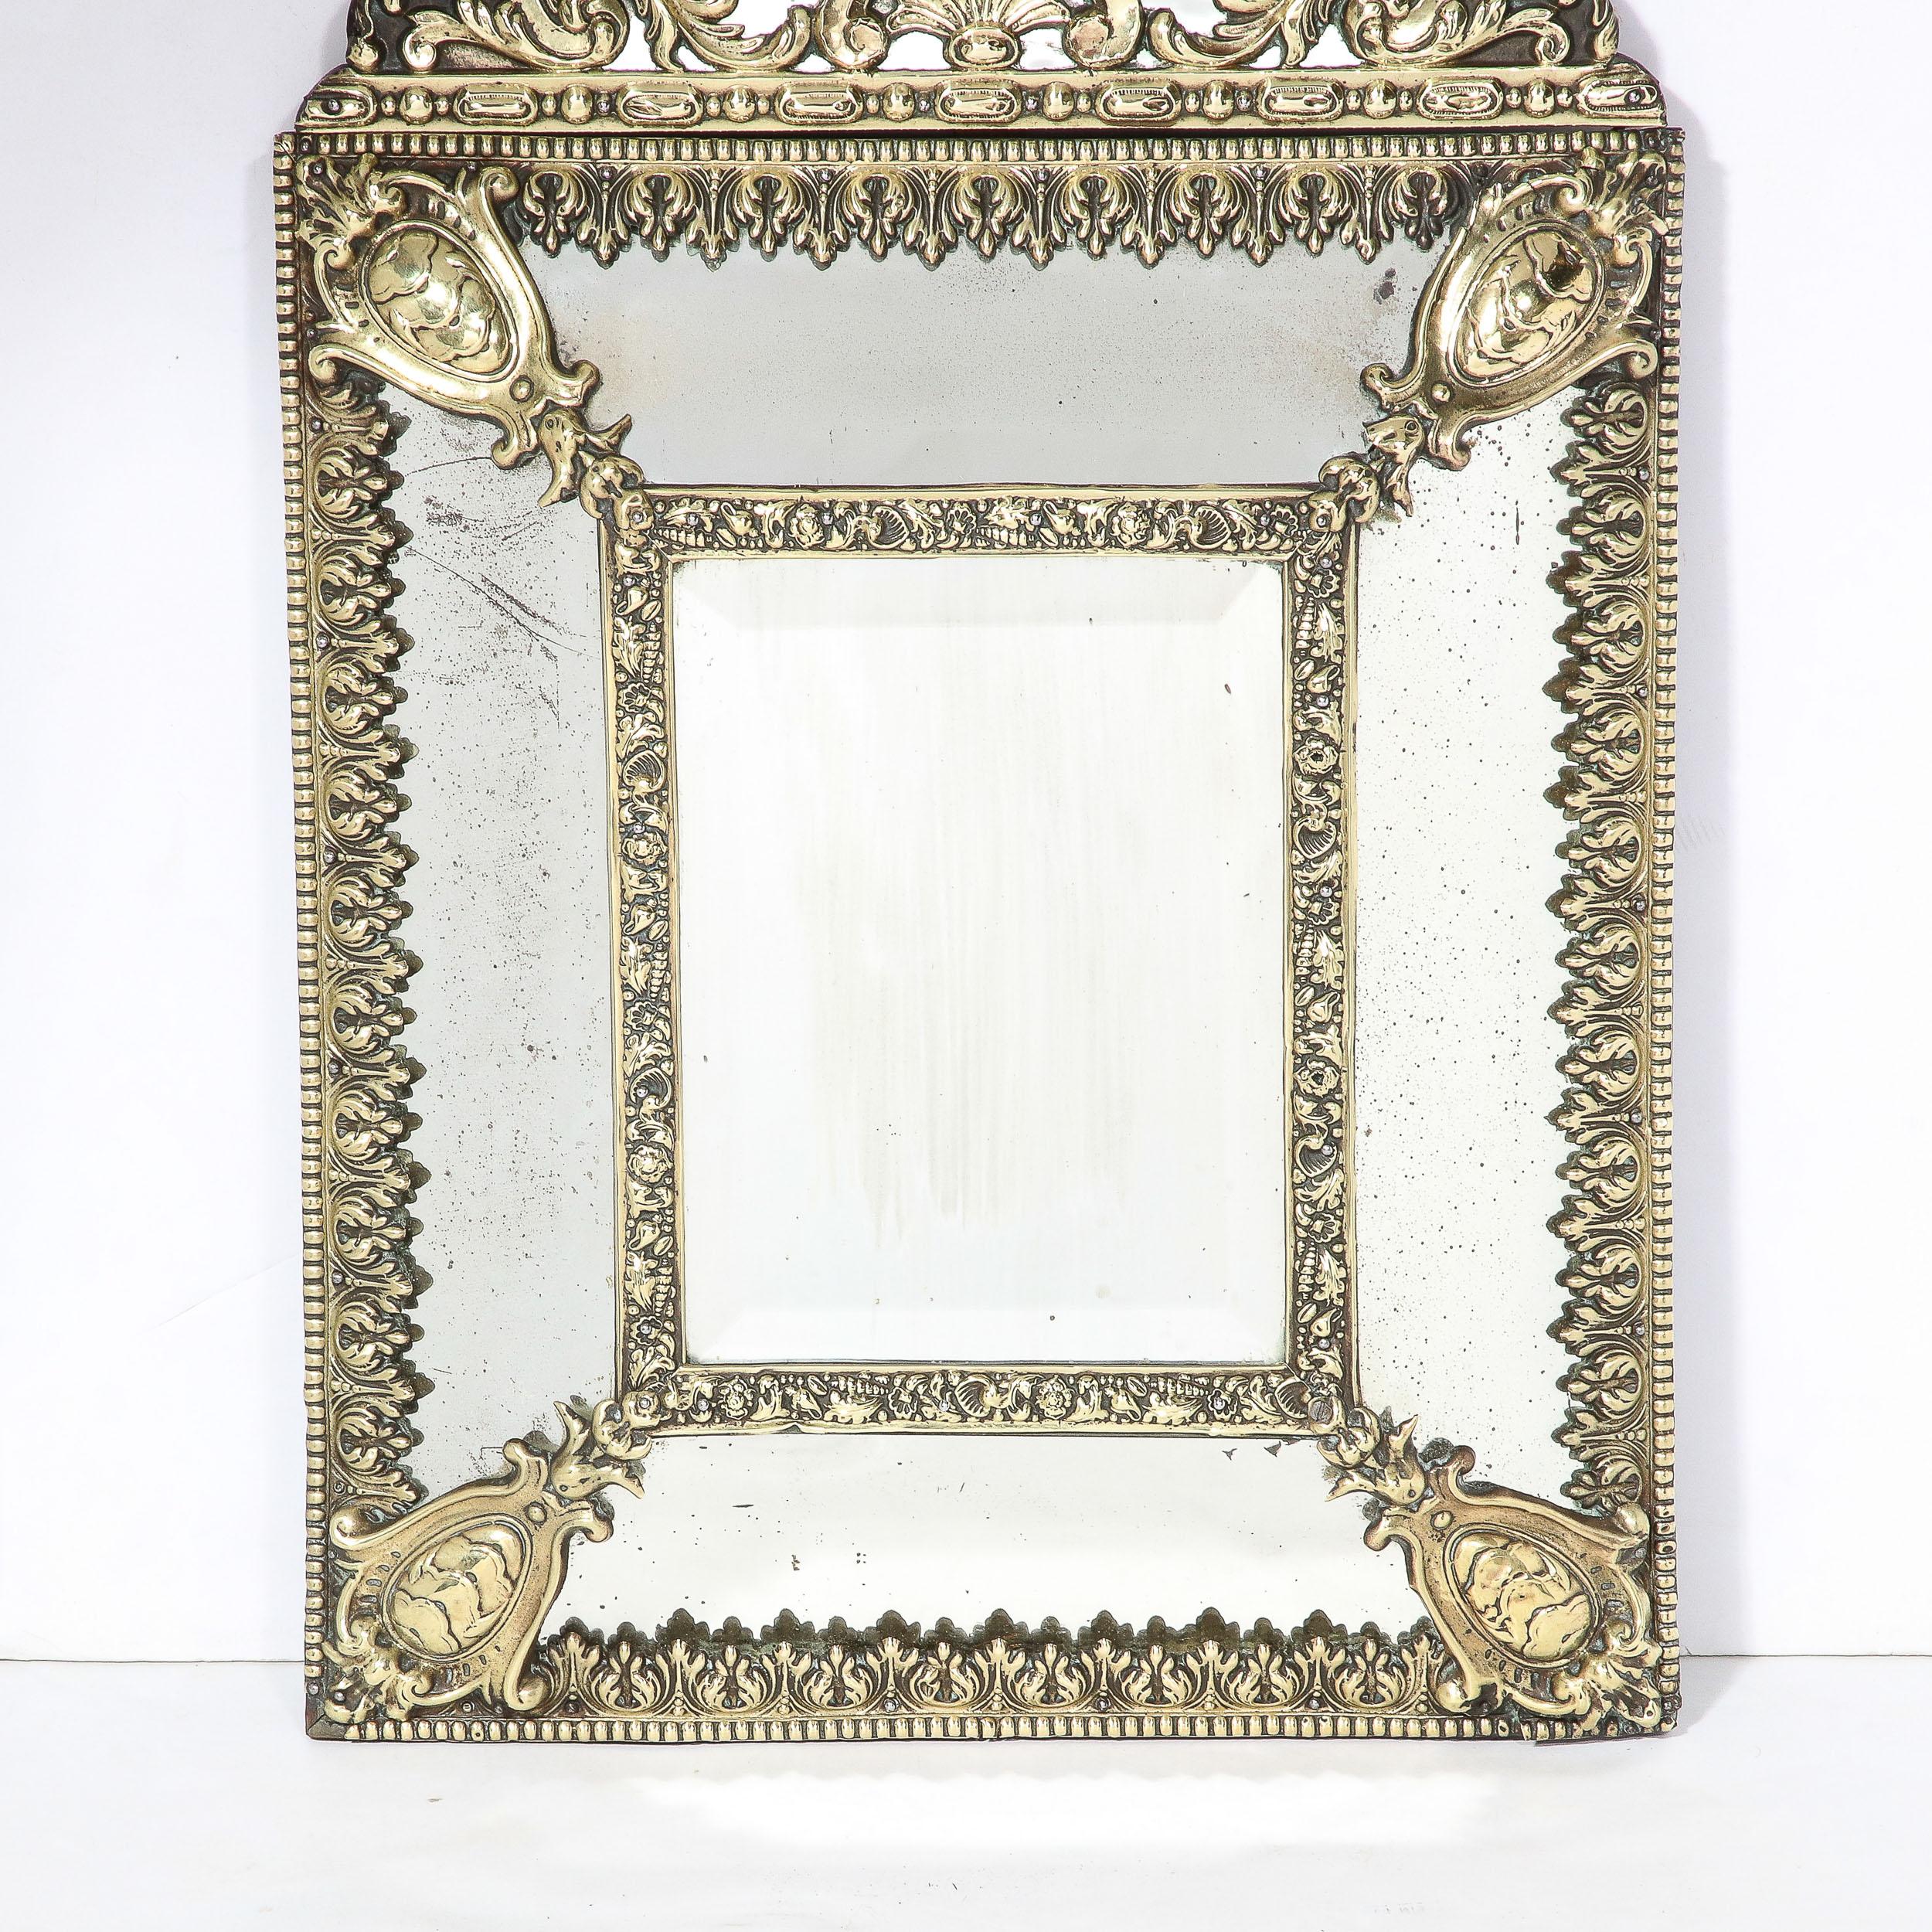 This gleaming Mid-Century Modernist Hollywood Regency Gilt Repousse Mirror Originates from the United States, Circa 1940. Featuring five panels of antiqued mirror glass lined in a stunning Gilt Repousse frame, the detailing and material contrast